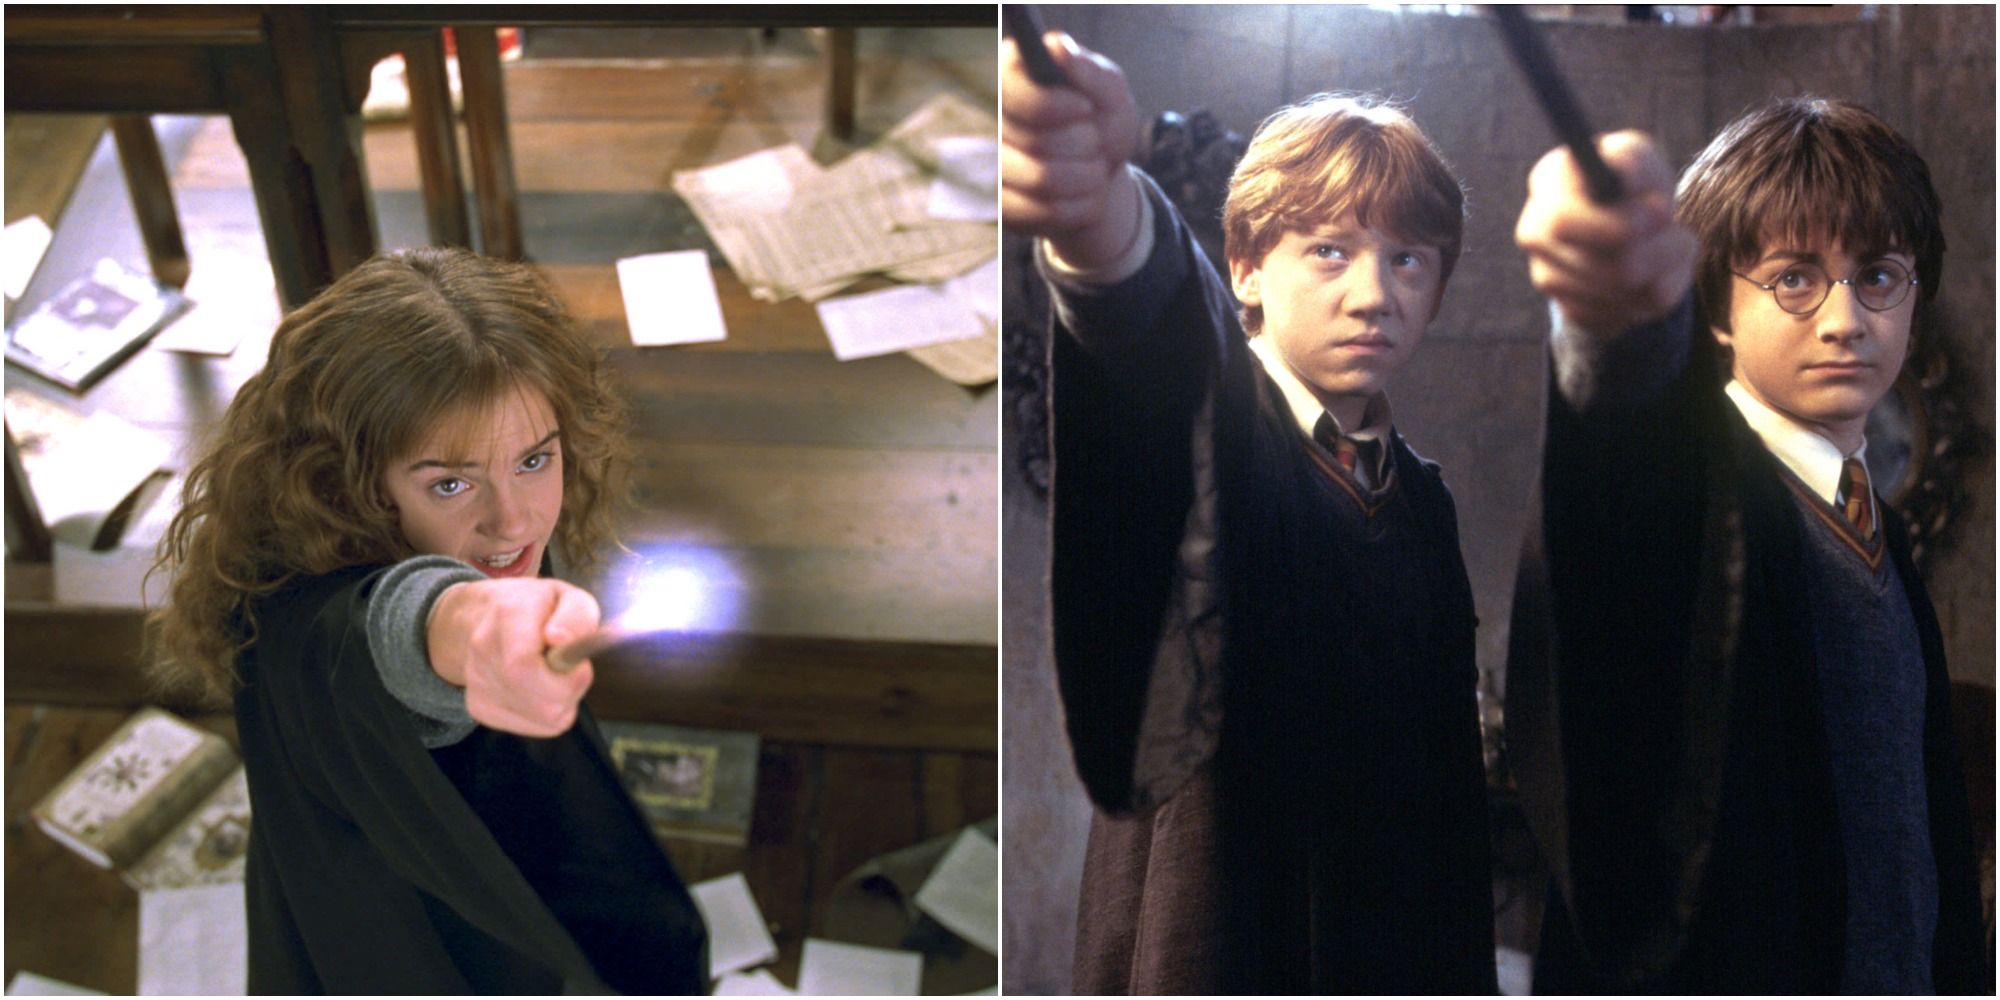 hermione, ron, and harry in the chamber of secrets